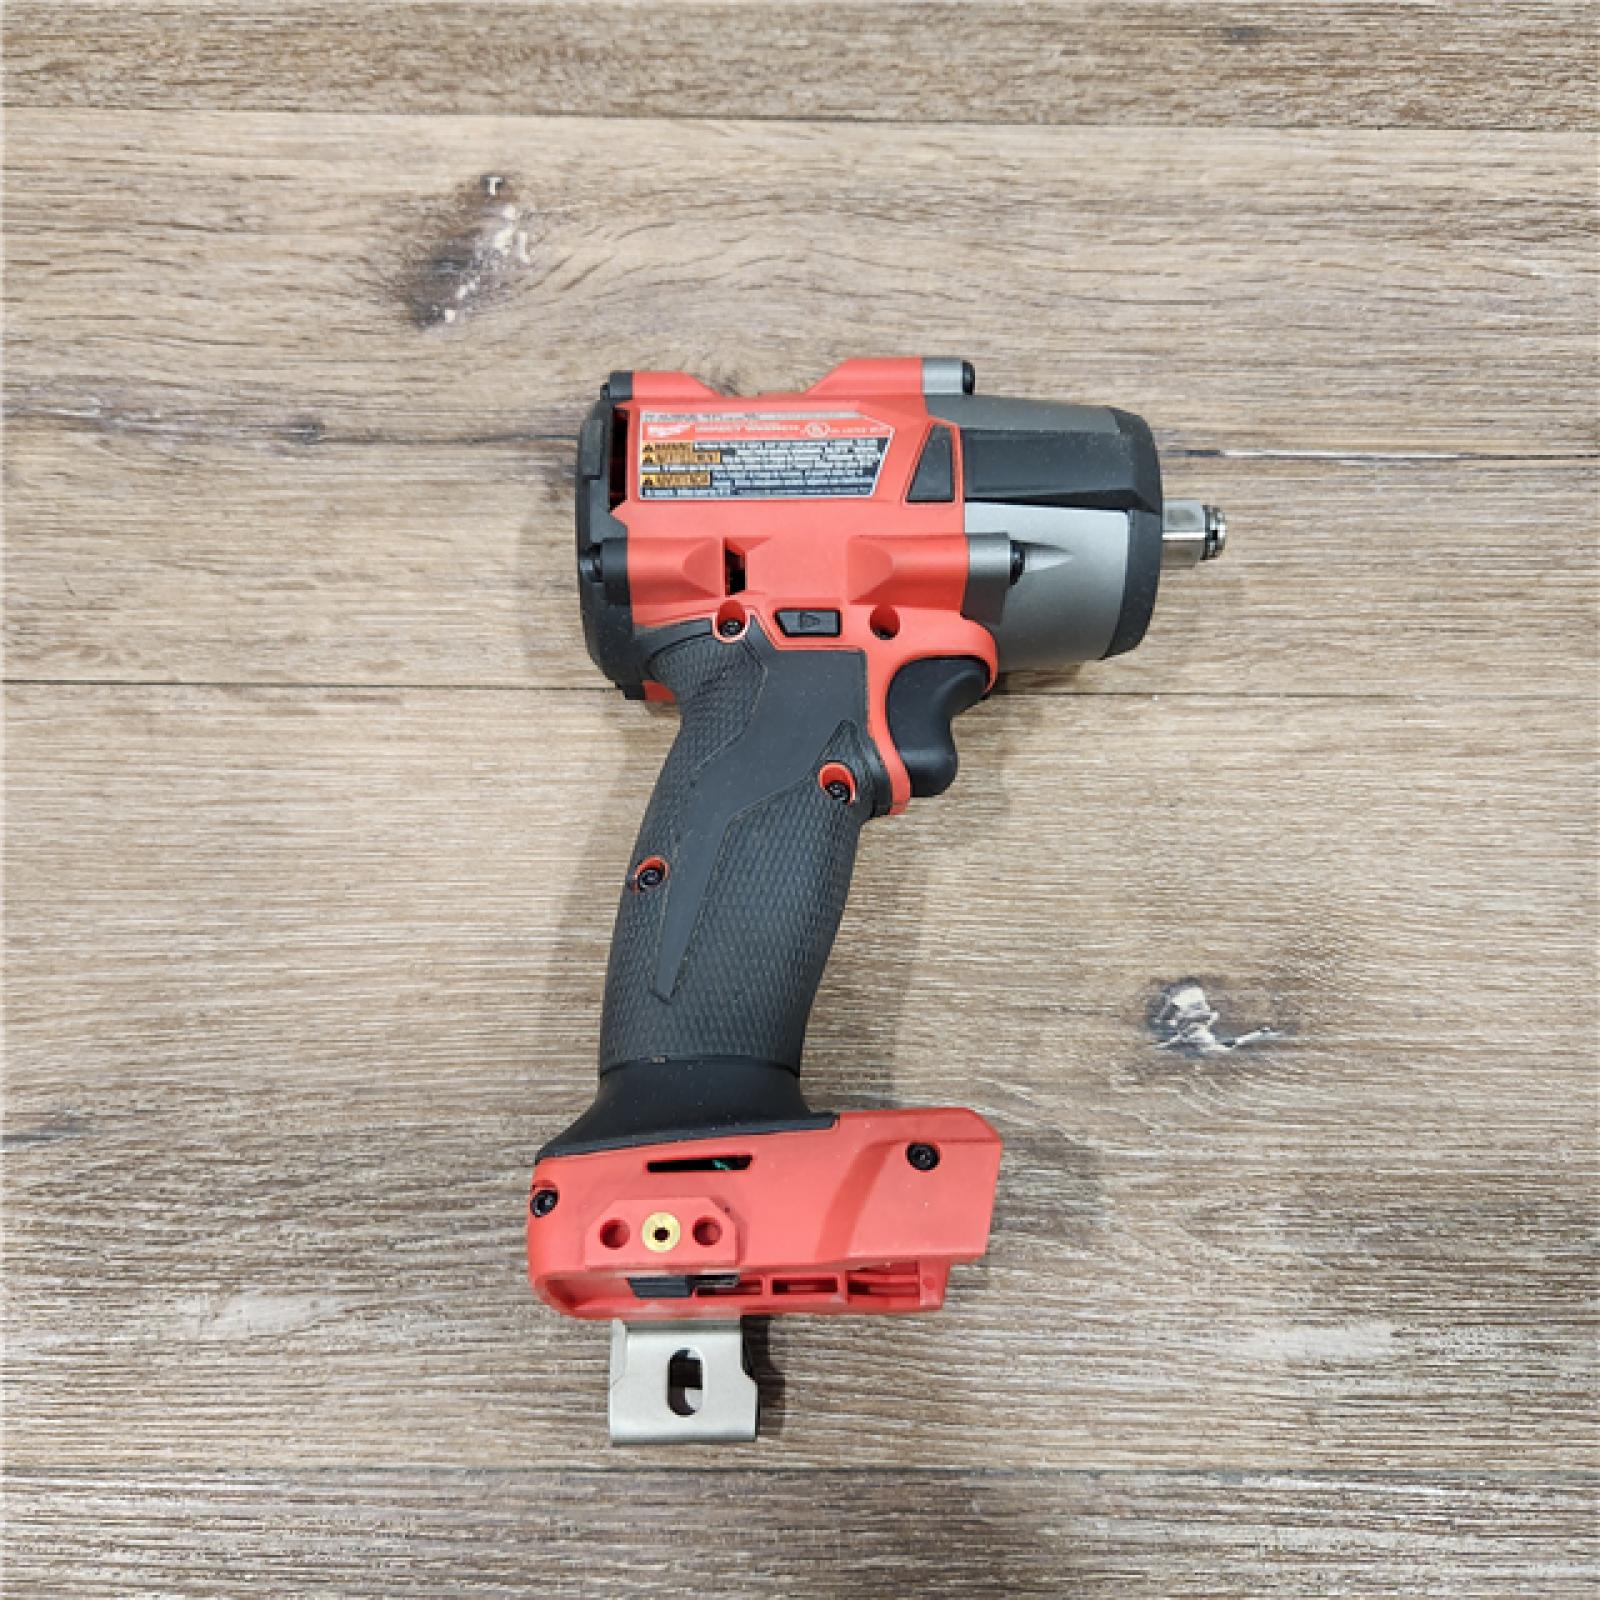 AS-IS M18 FUEL Gen-2 18V Lithium-Ion Brushless Cordless Mid Torque 1/2 in. Impact Wrench W/Friction Ring (Tool-Only)